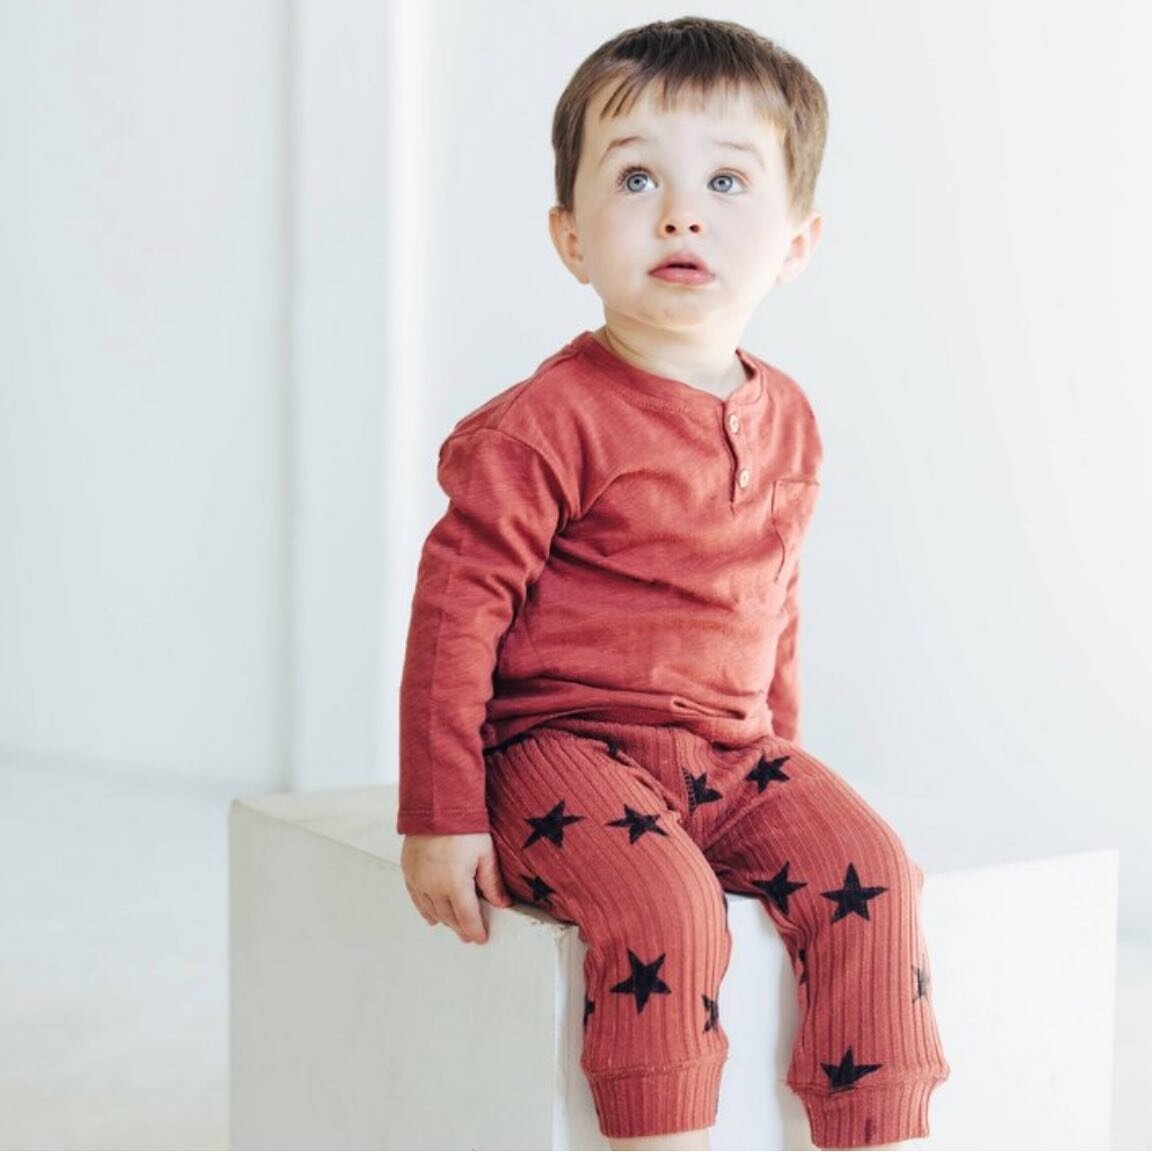 wearing our holiday reds all season long! 
tag us in your fav @graysoncollective fits

shop Grayson Collective on Target.com or in select stores
@targetstyle @target
#graysonthreads #graysoncollective #babyclothes #toddlerclothes #targetstyle #babyoo